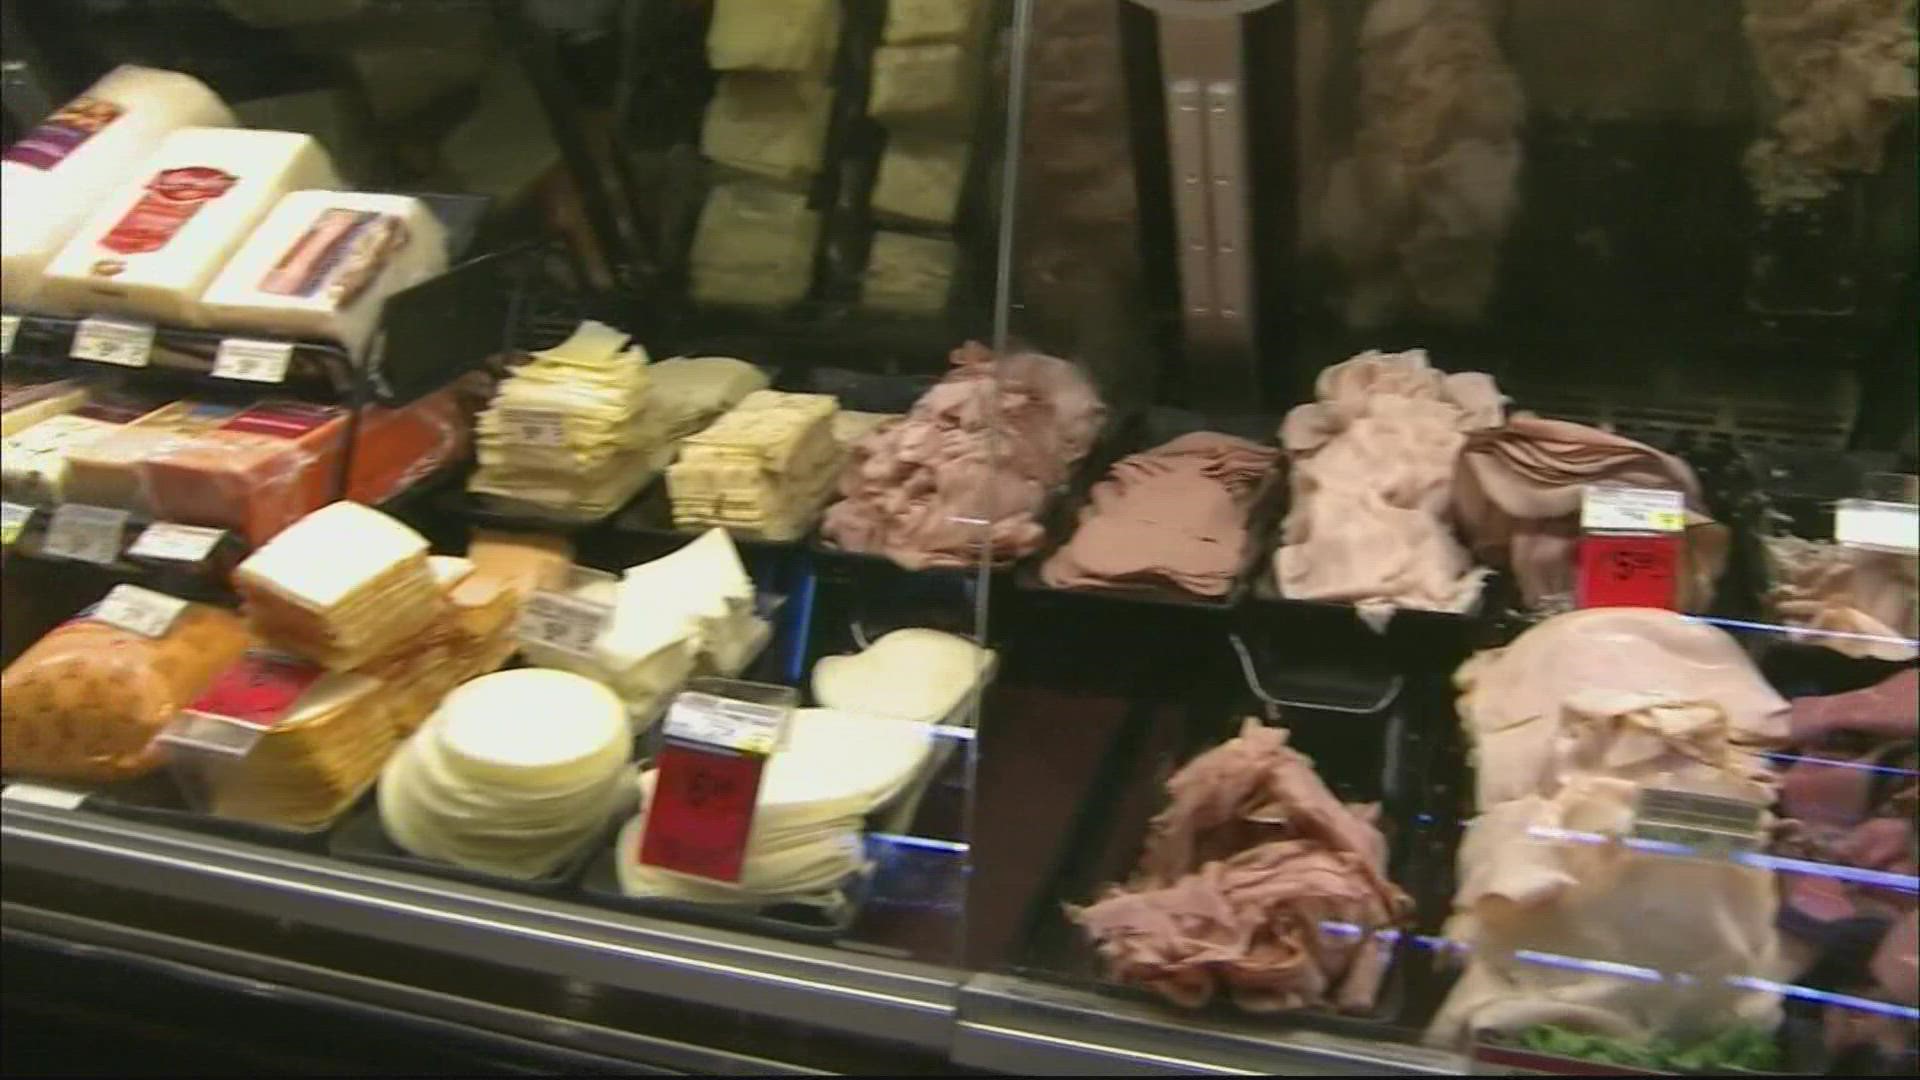 A person in Maryland has died and officials believe their death is due to a listeria outbreak connected to deli counter meats and cheeses.